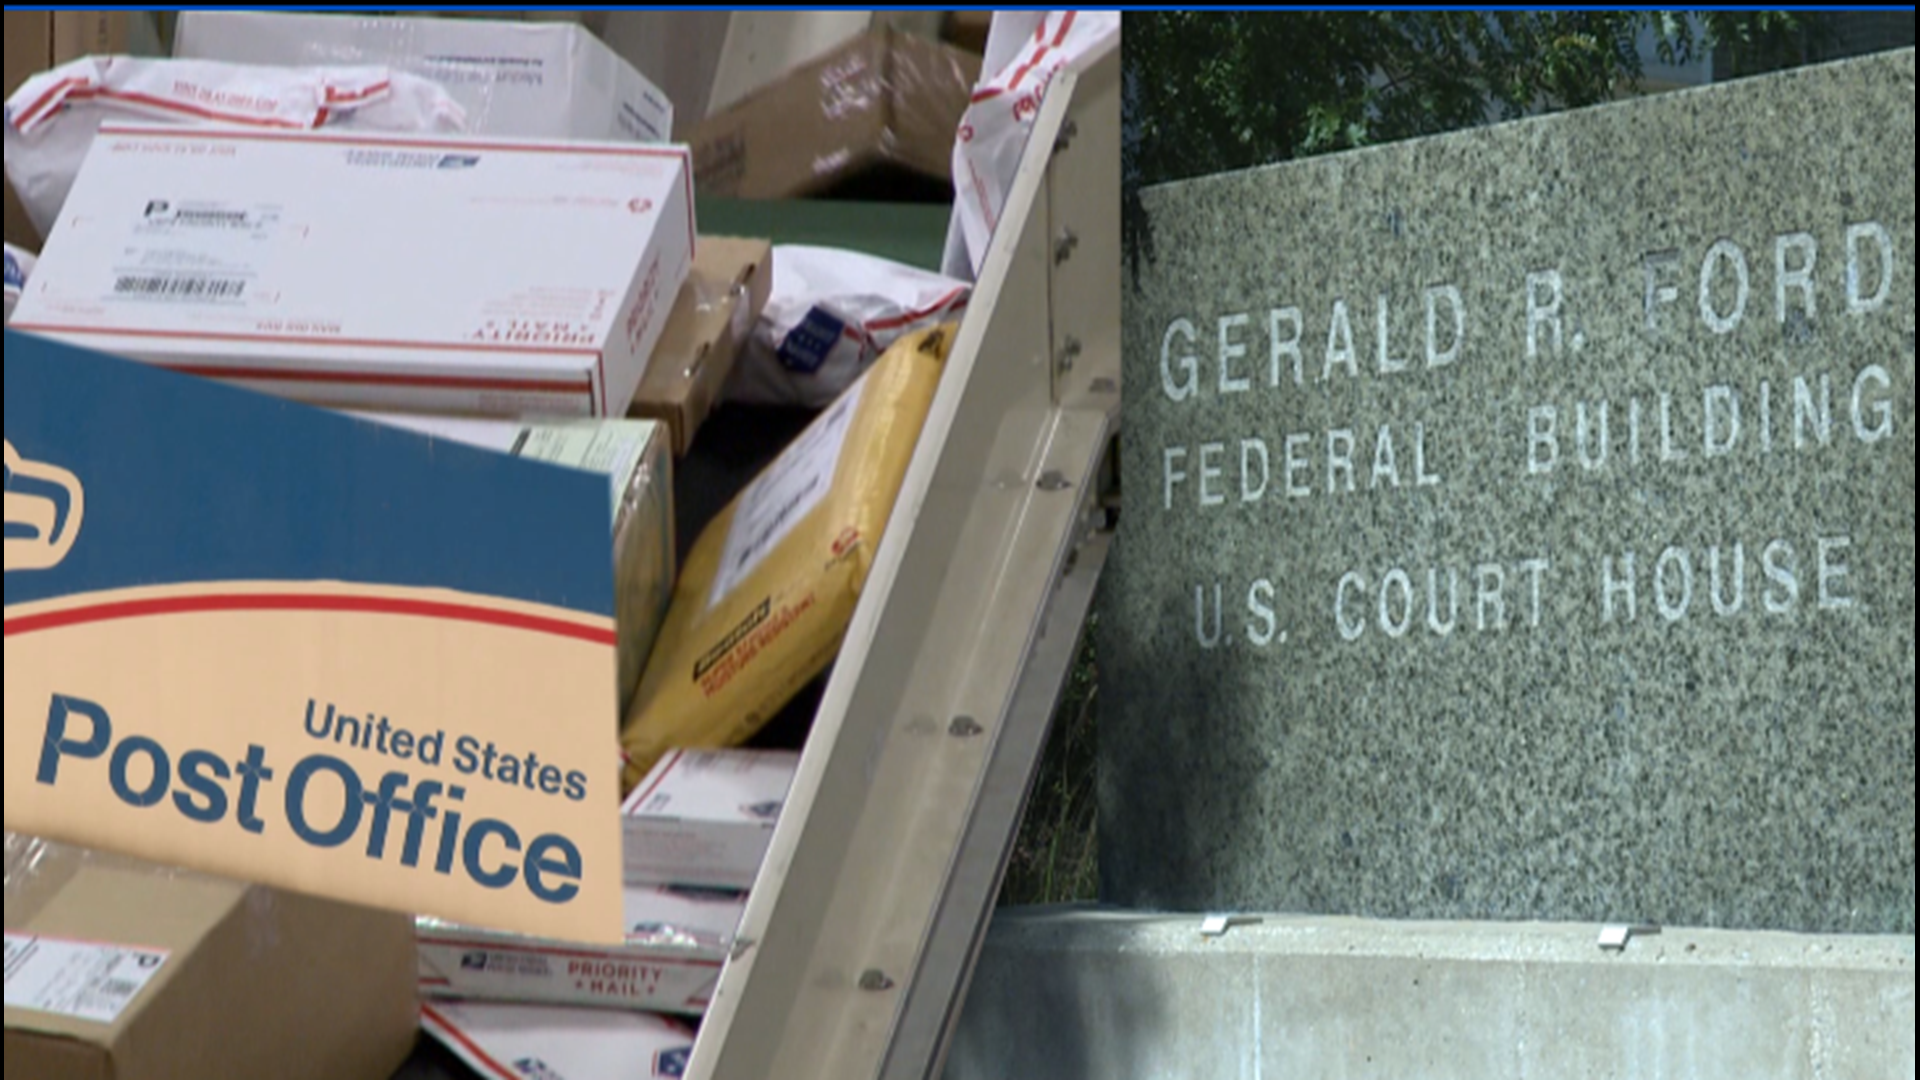 Andrew Chopp, a 20-year postal employee, came under scrutiny after co-workers saw him ‘rifling through mail matter’ in March of 2019. He has since lost his job.